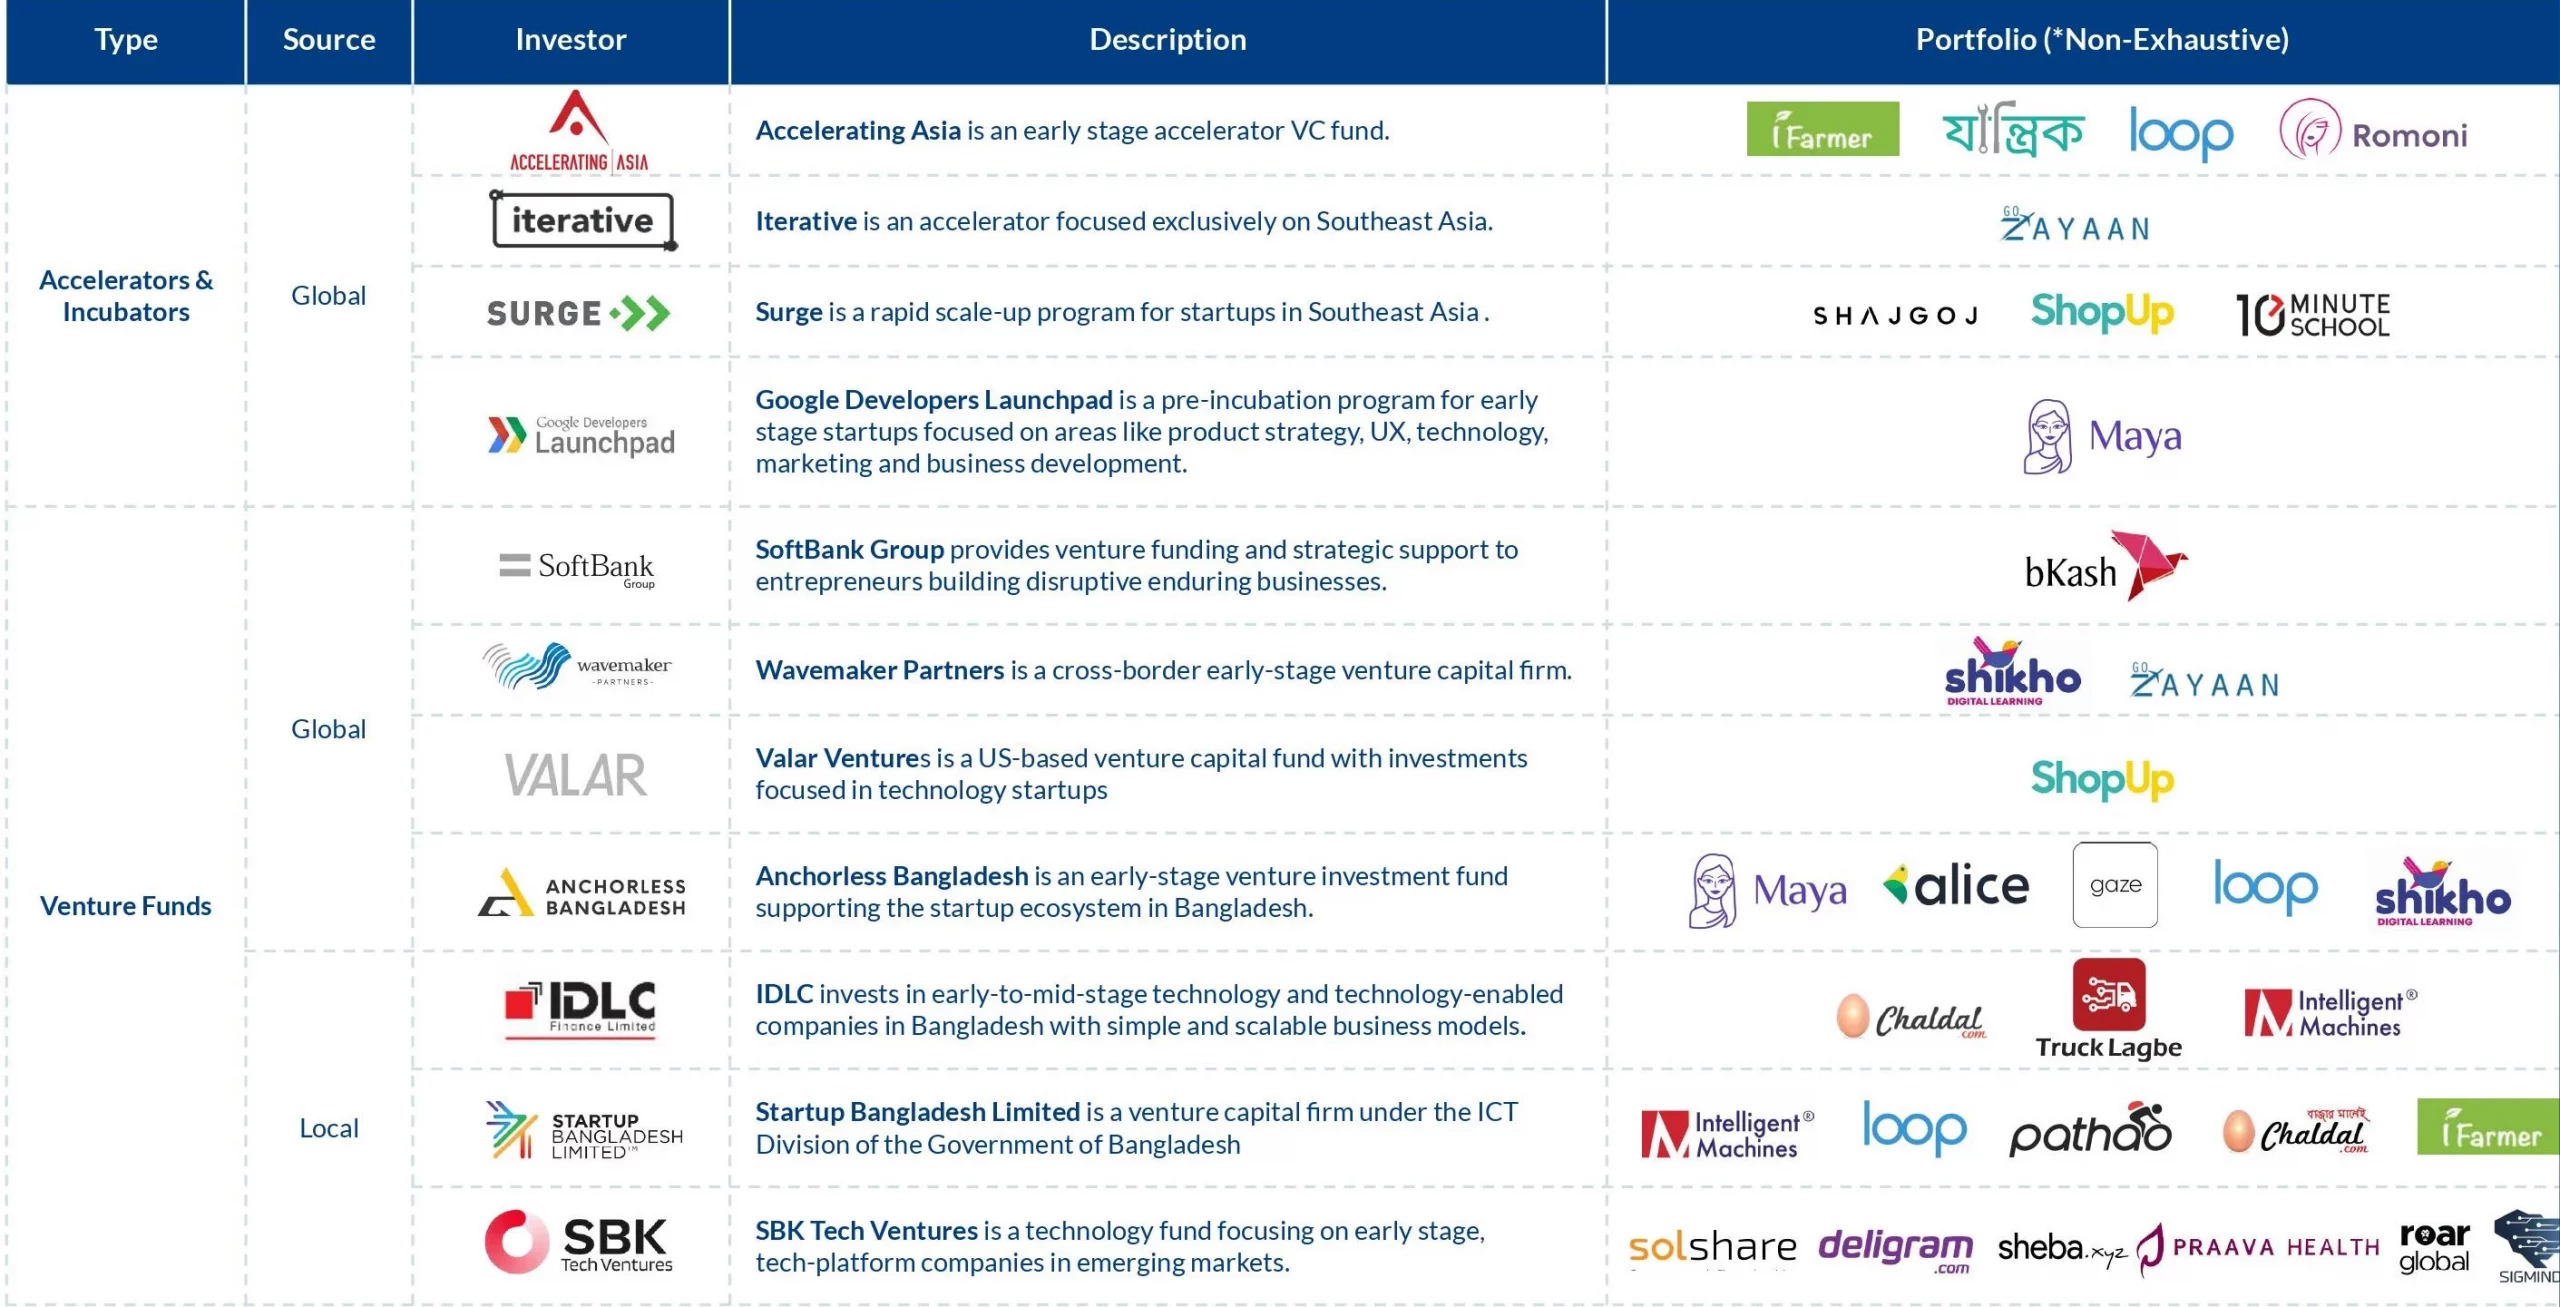 Investors From Vibrant Investor Groups Are Pushing the Startup Ecosystem Forward